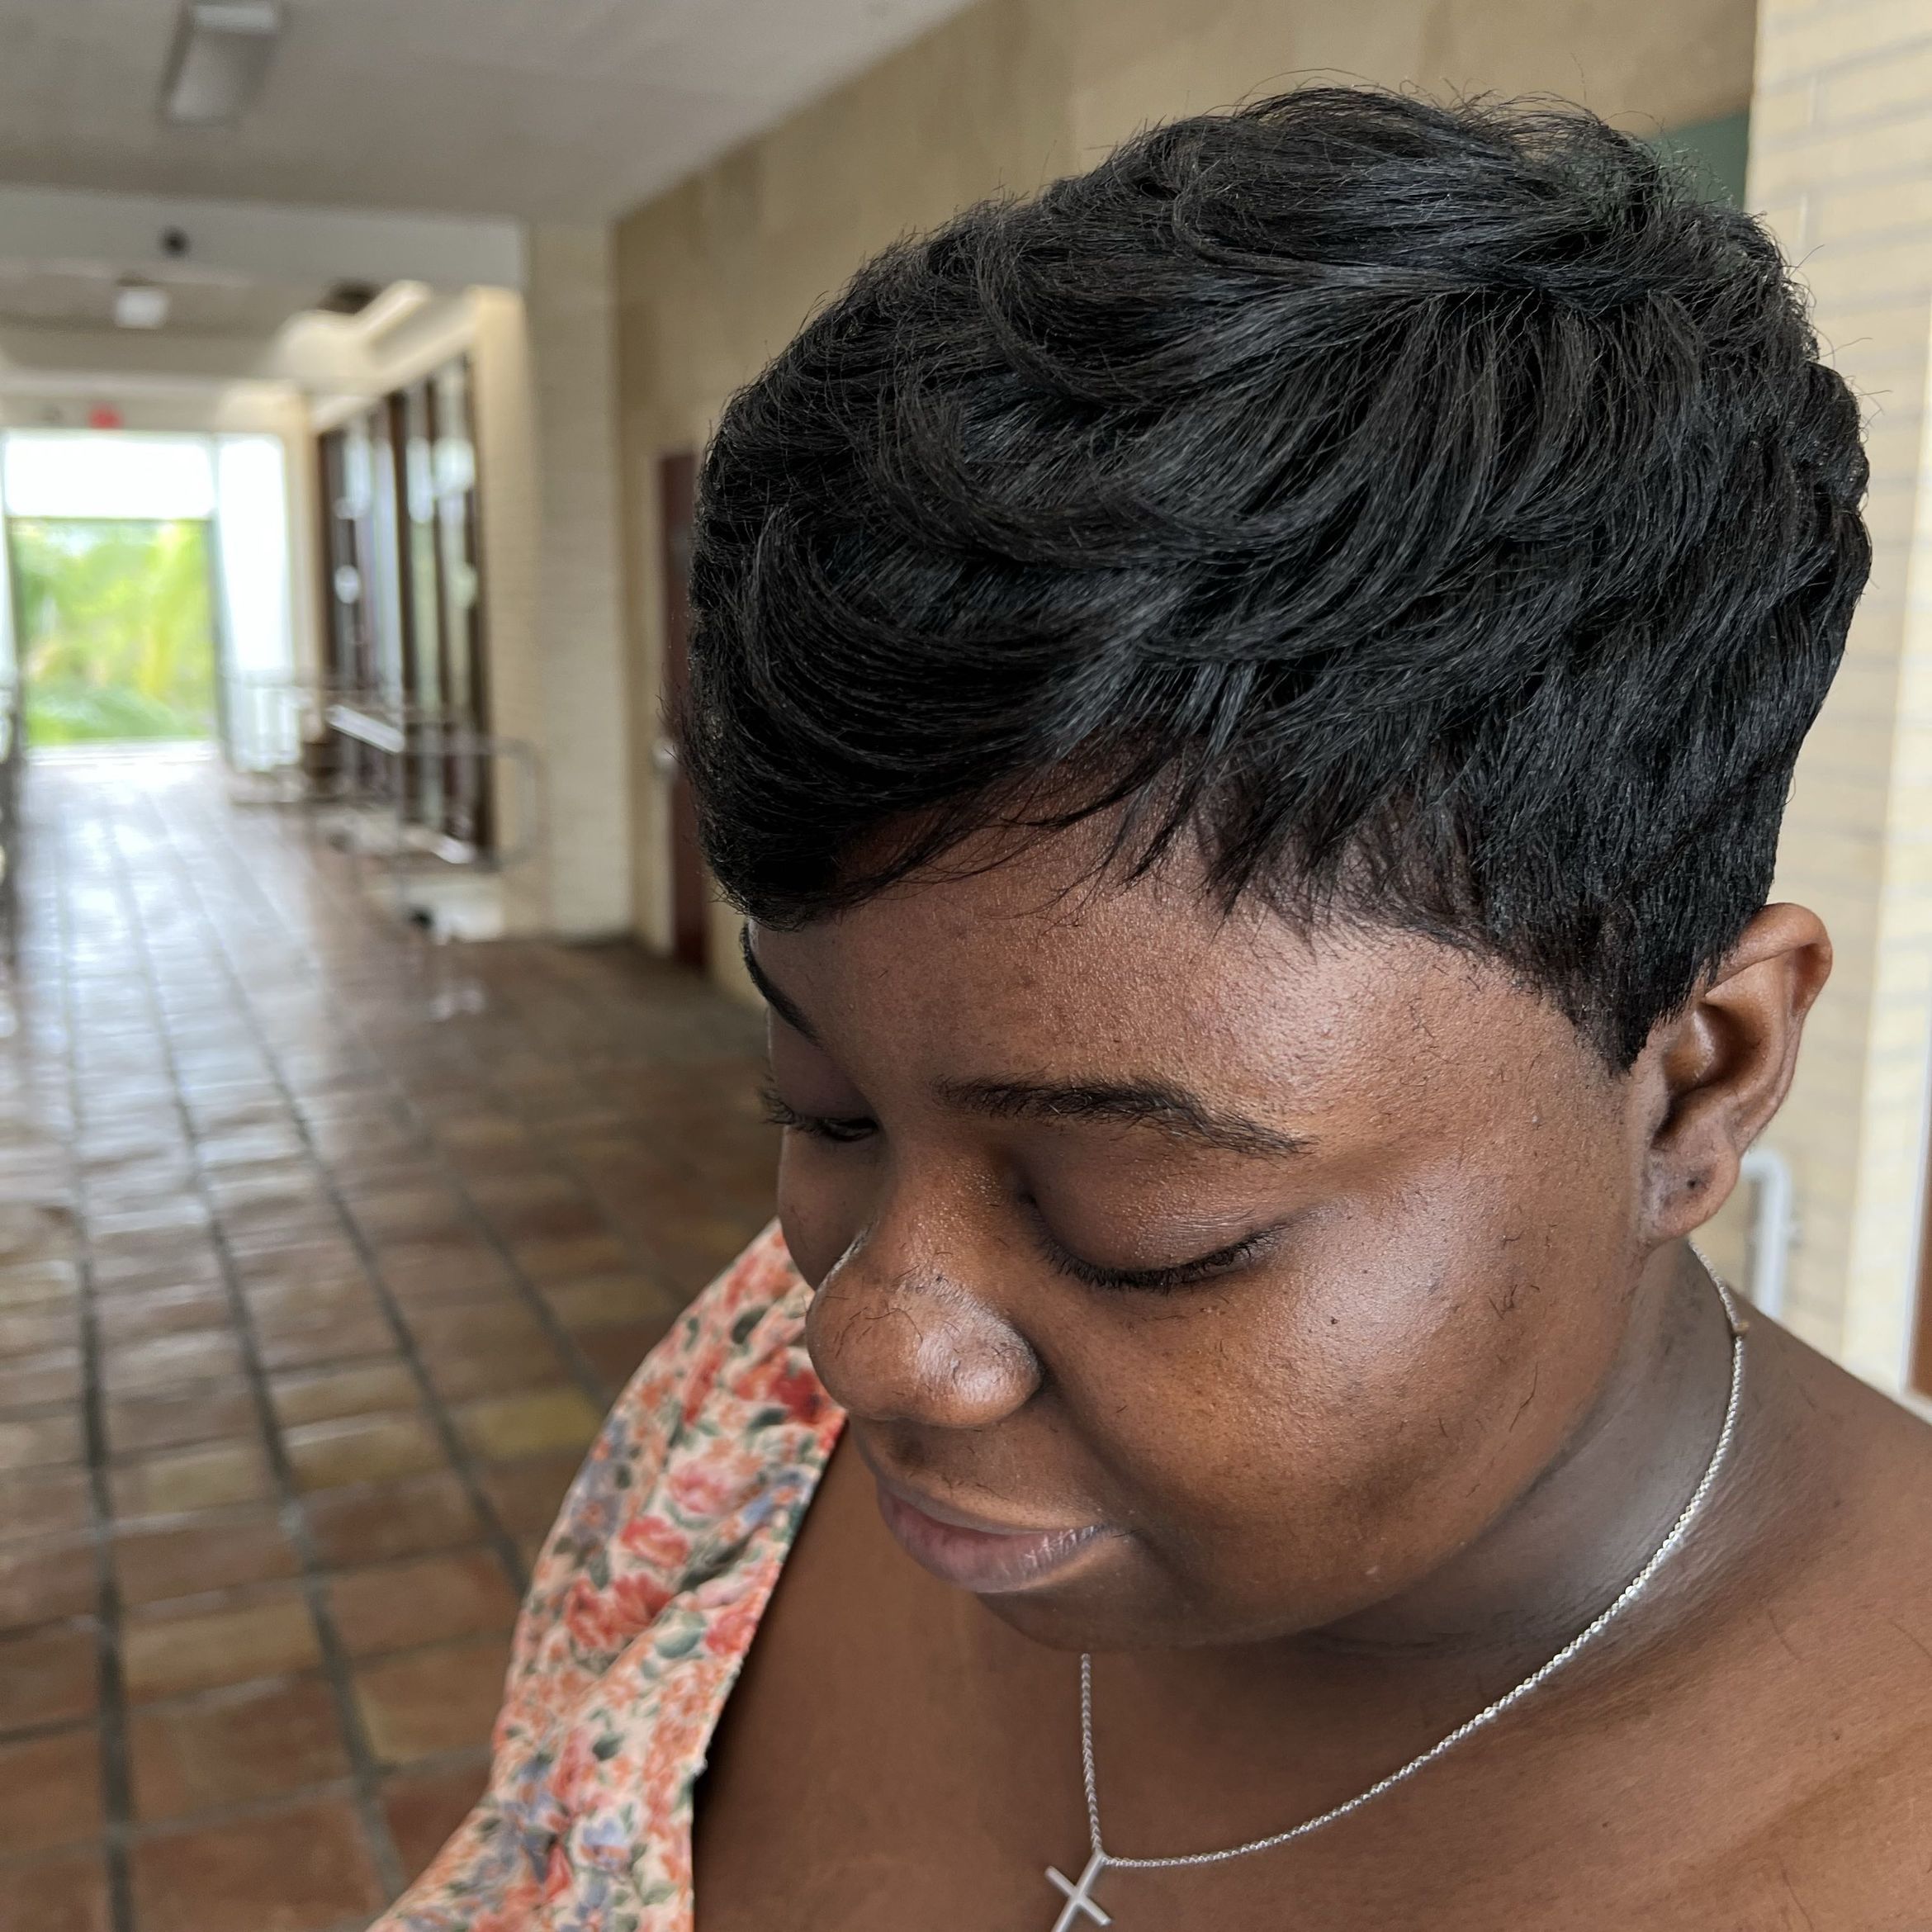 Relaxer, treatment, and cut portfolio